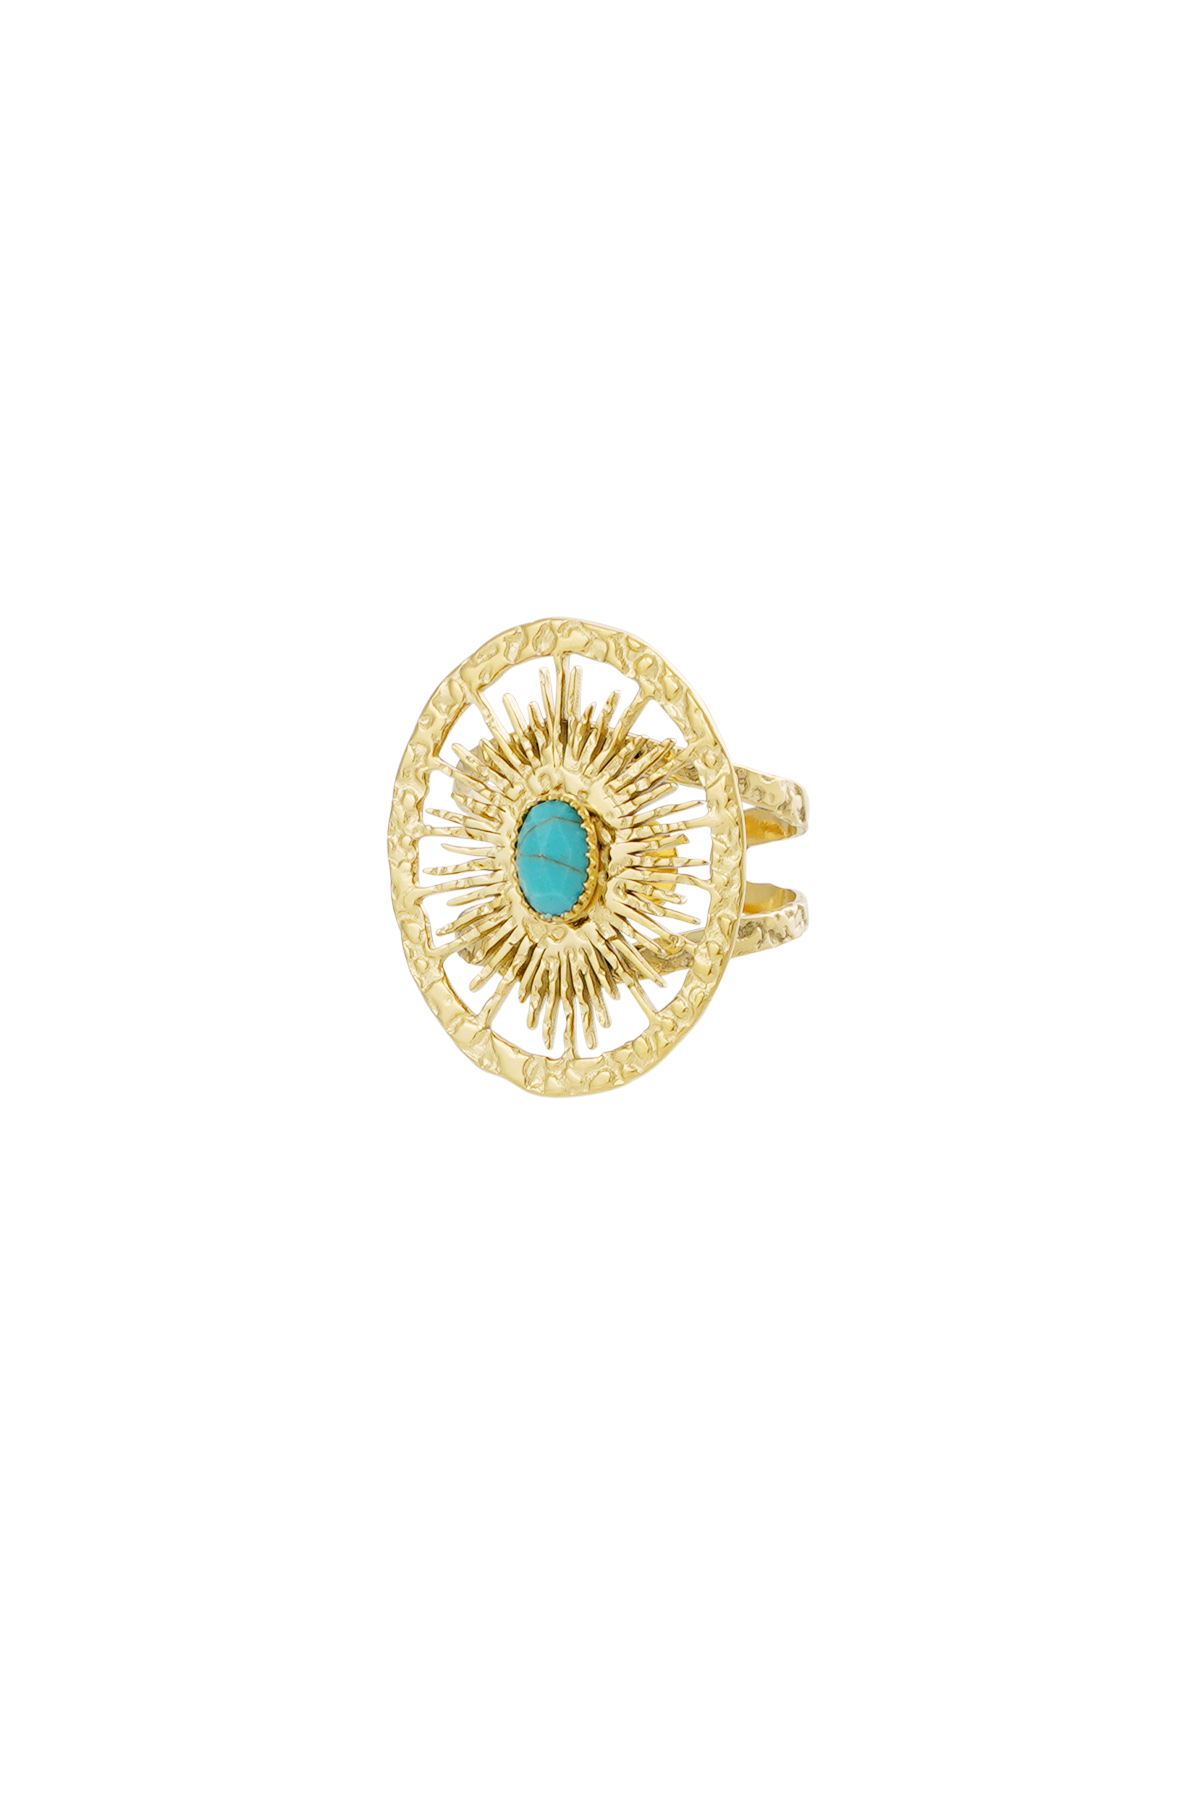 Bague ronde twister avec pierre - or/turquoise